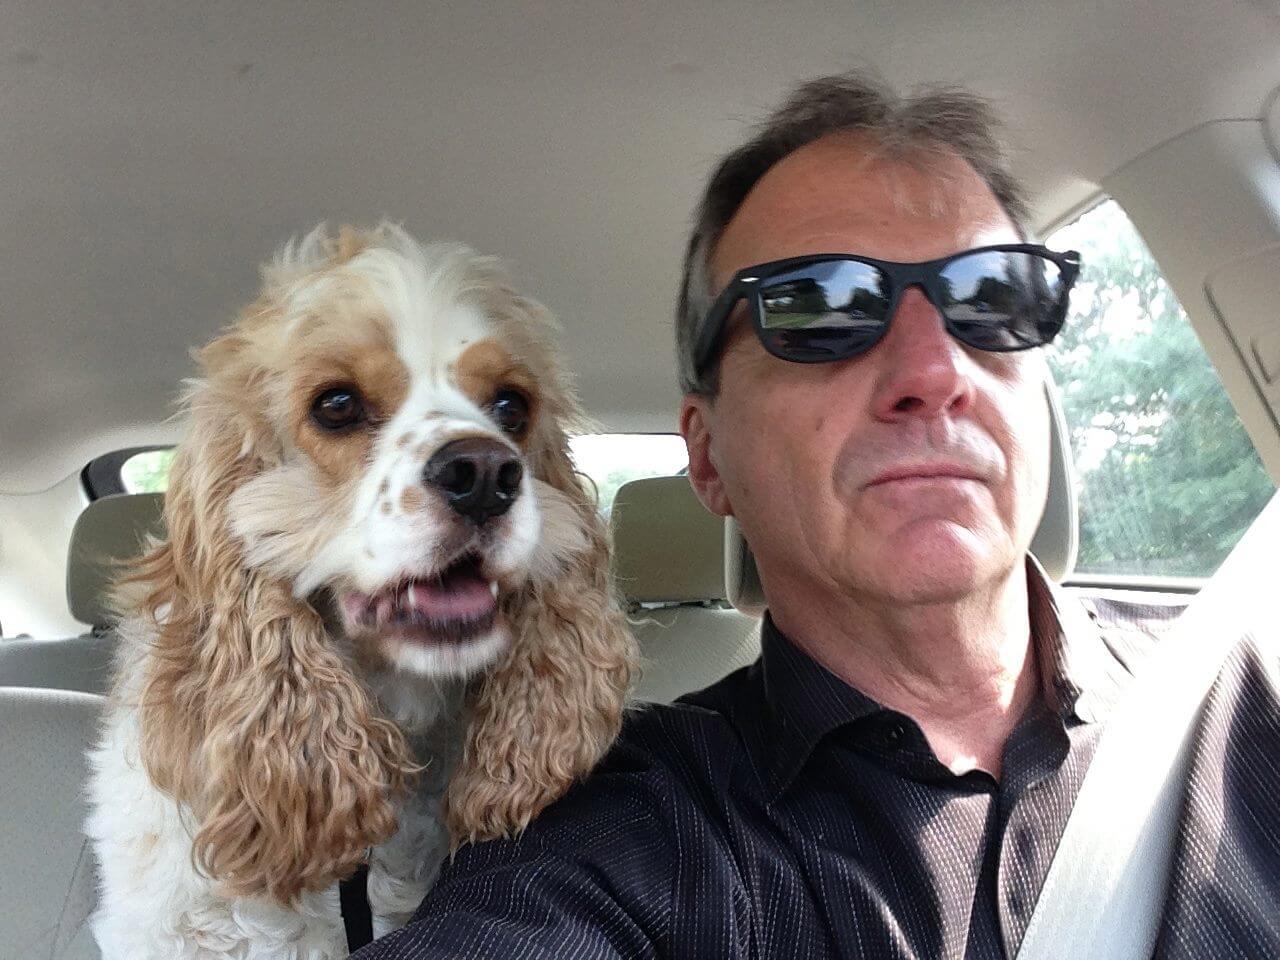 Mike and Pudgey heading home for a hard day's work